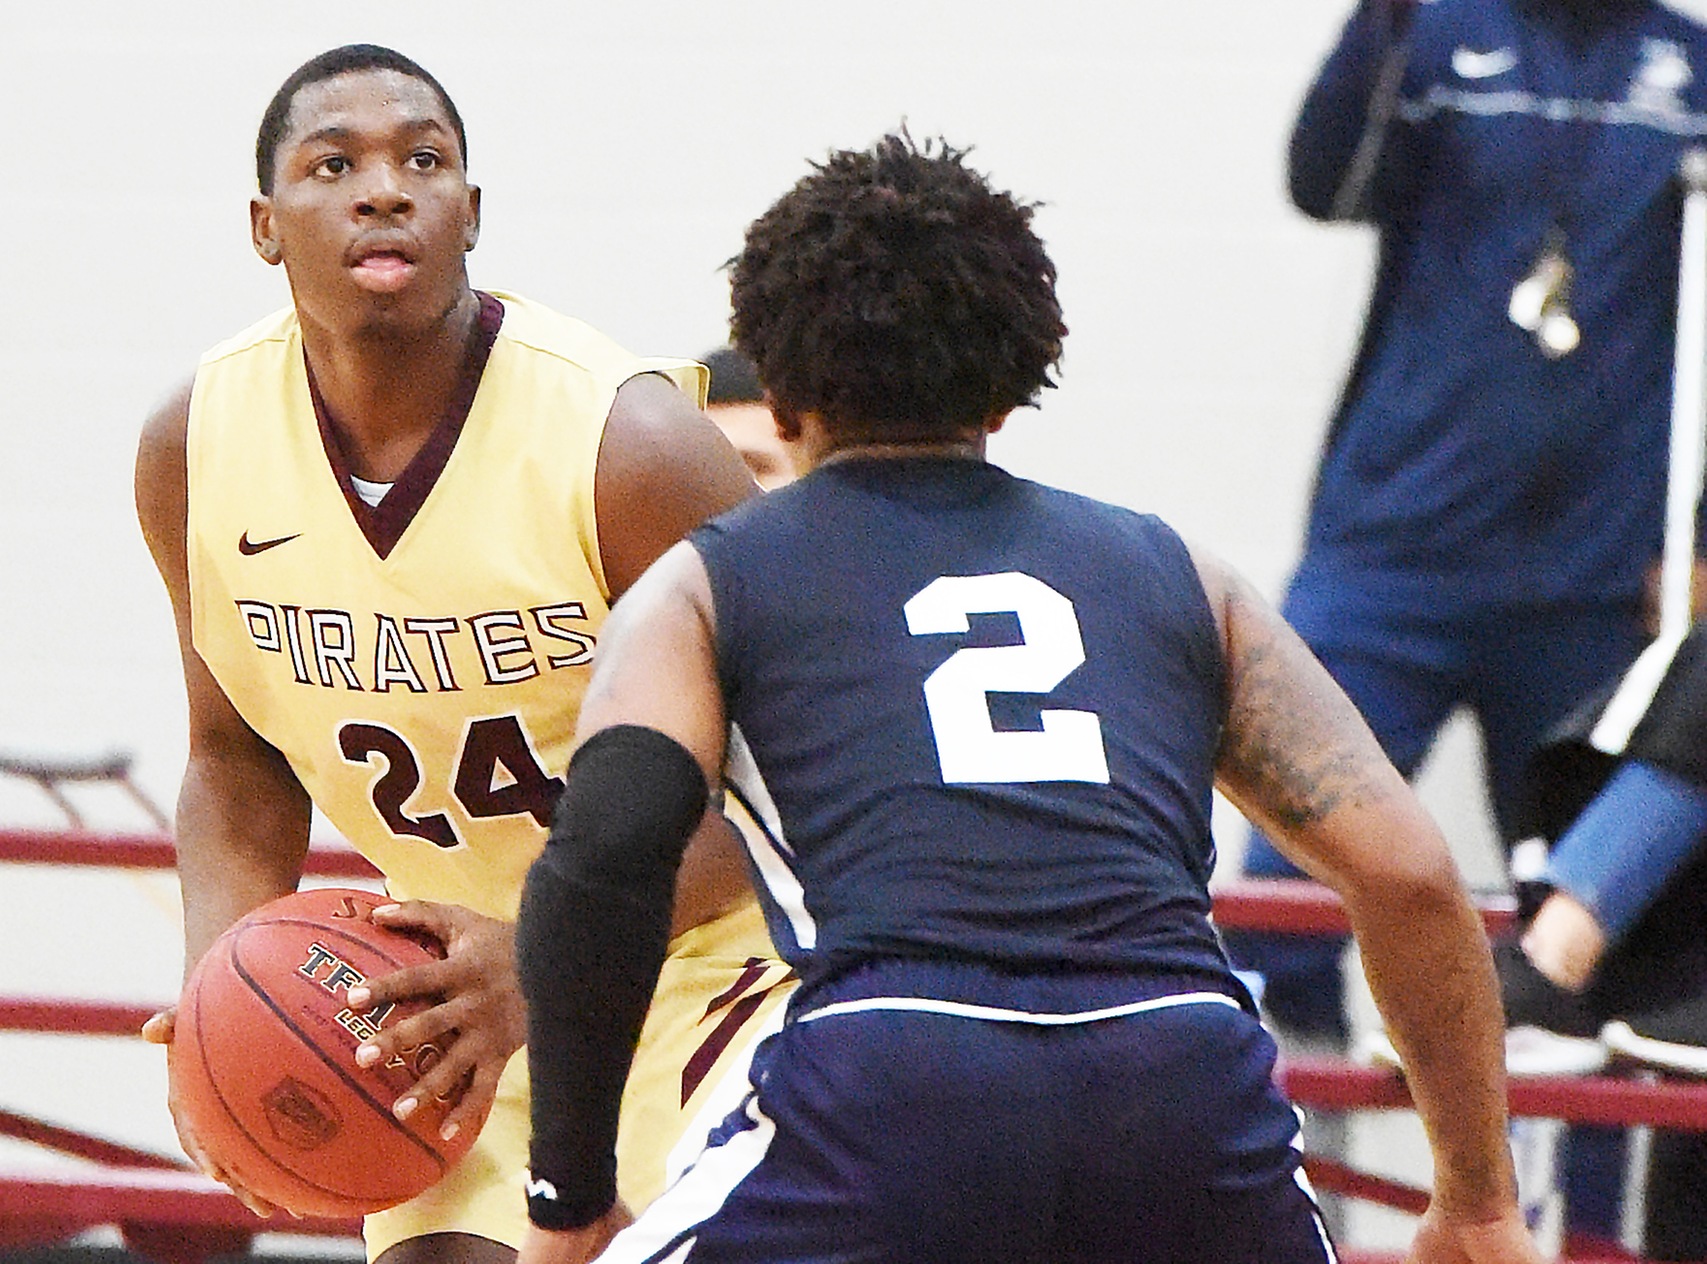 Tyrese Bellamy scored six points on two 3-pointers Saturday against Lamar State College.